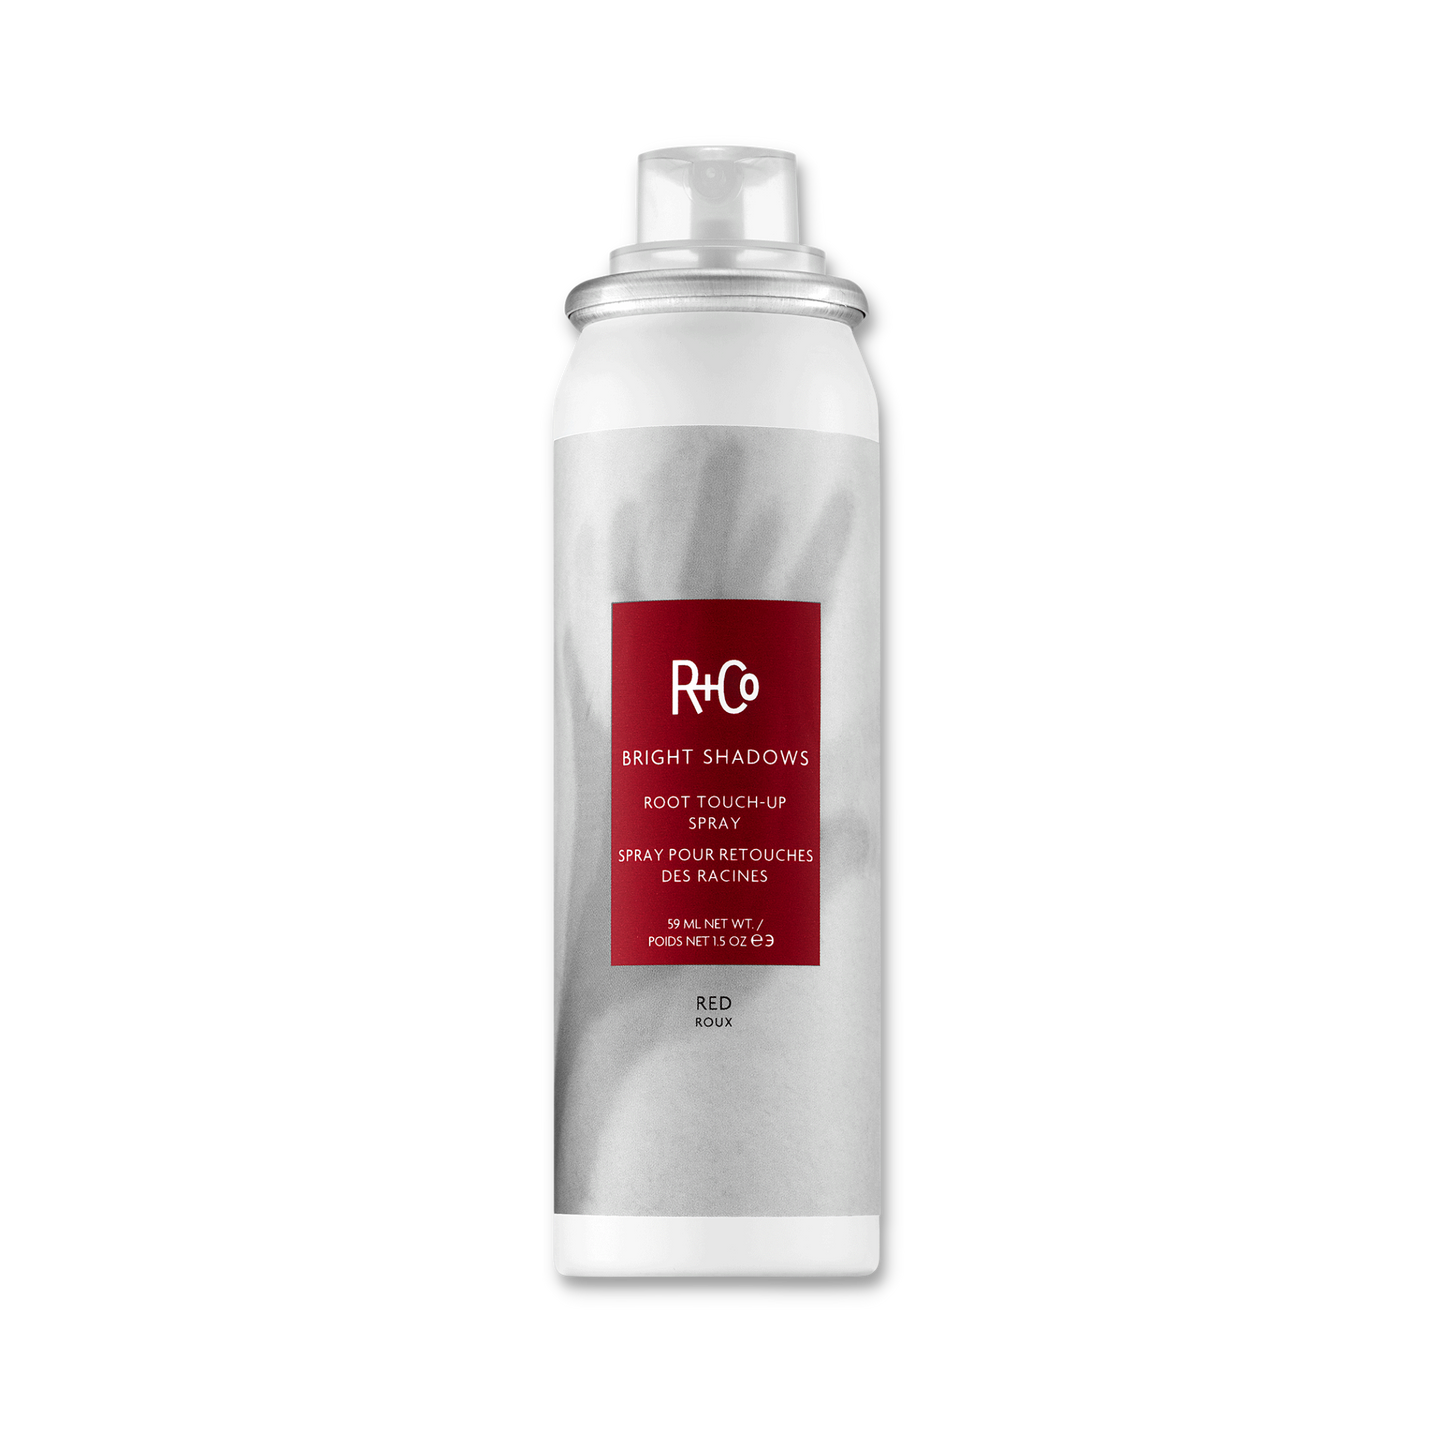 R+CO BRIGHT SHADOWS ROOT TOUCH UP SPRAY